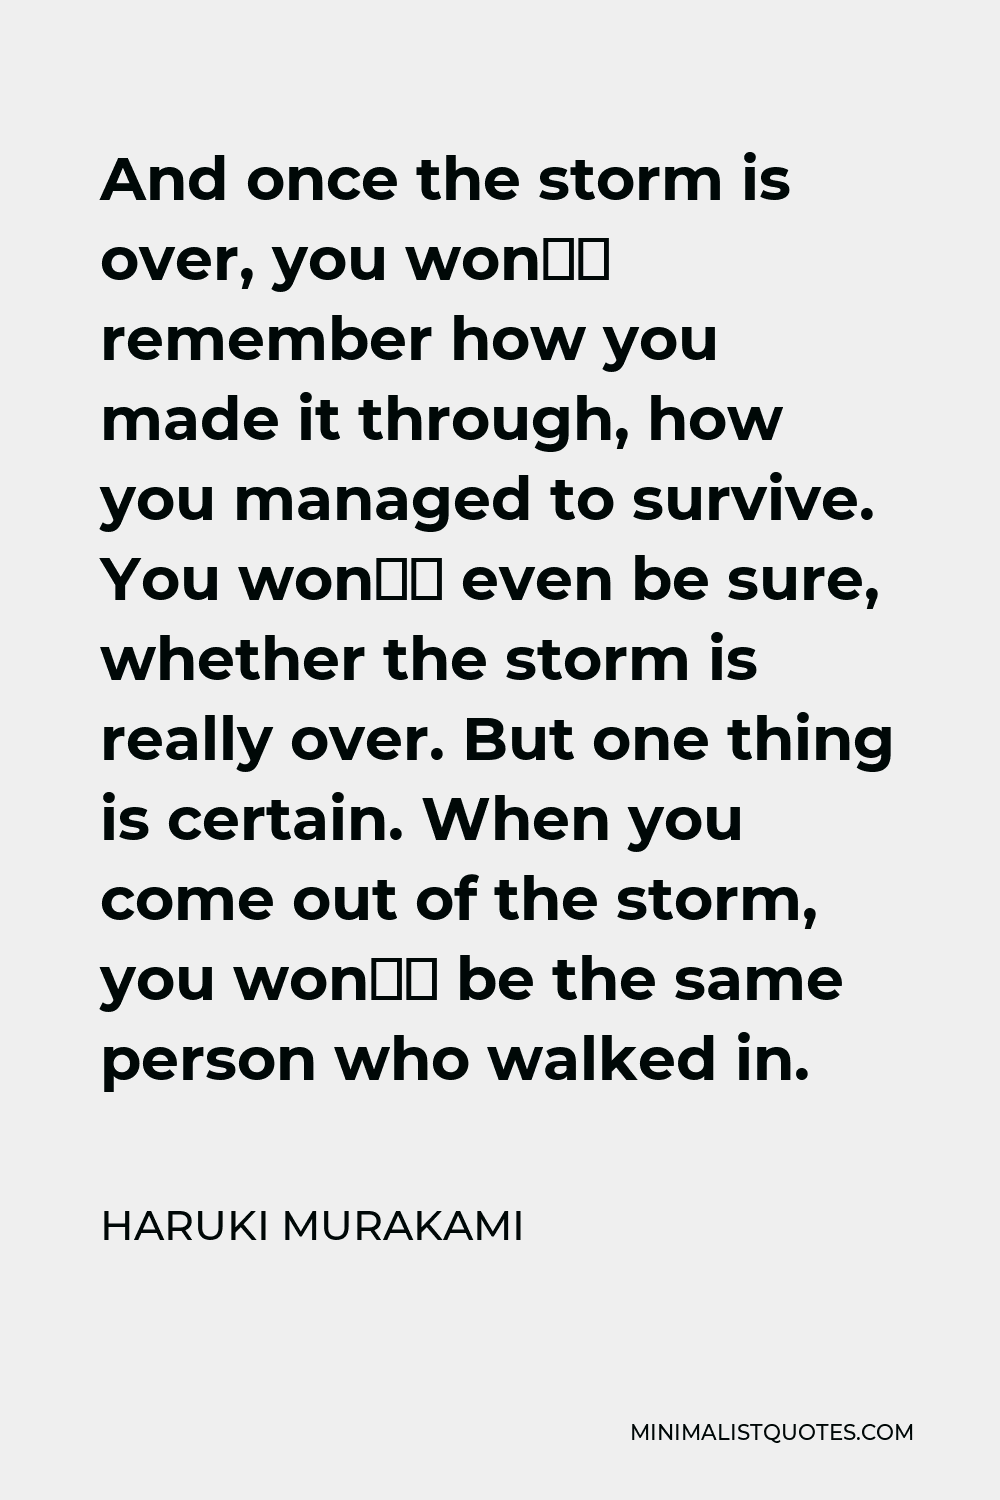 Haruki Murakami Quote - And once the storm is over, you won’t remember how you made it through, how you managed to survive. You won’t even be sure, whether the storm is really over. But one thing is certain. When you come out of the storm, you won’t be the same person who walked in.